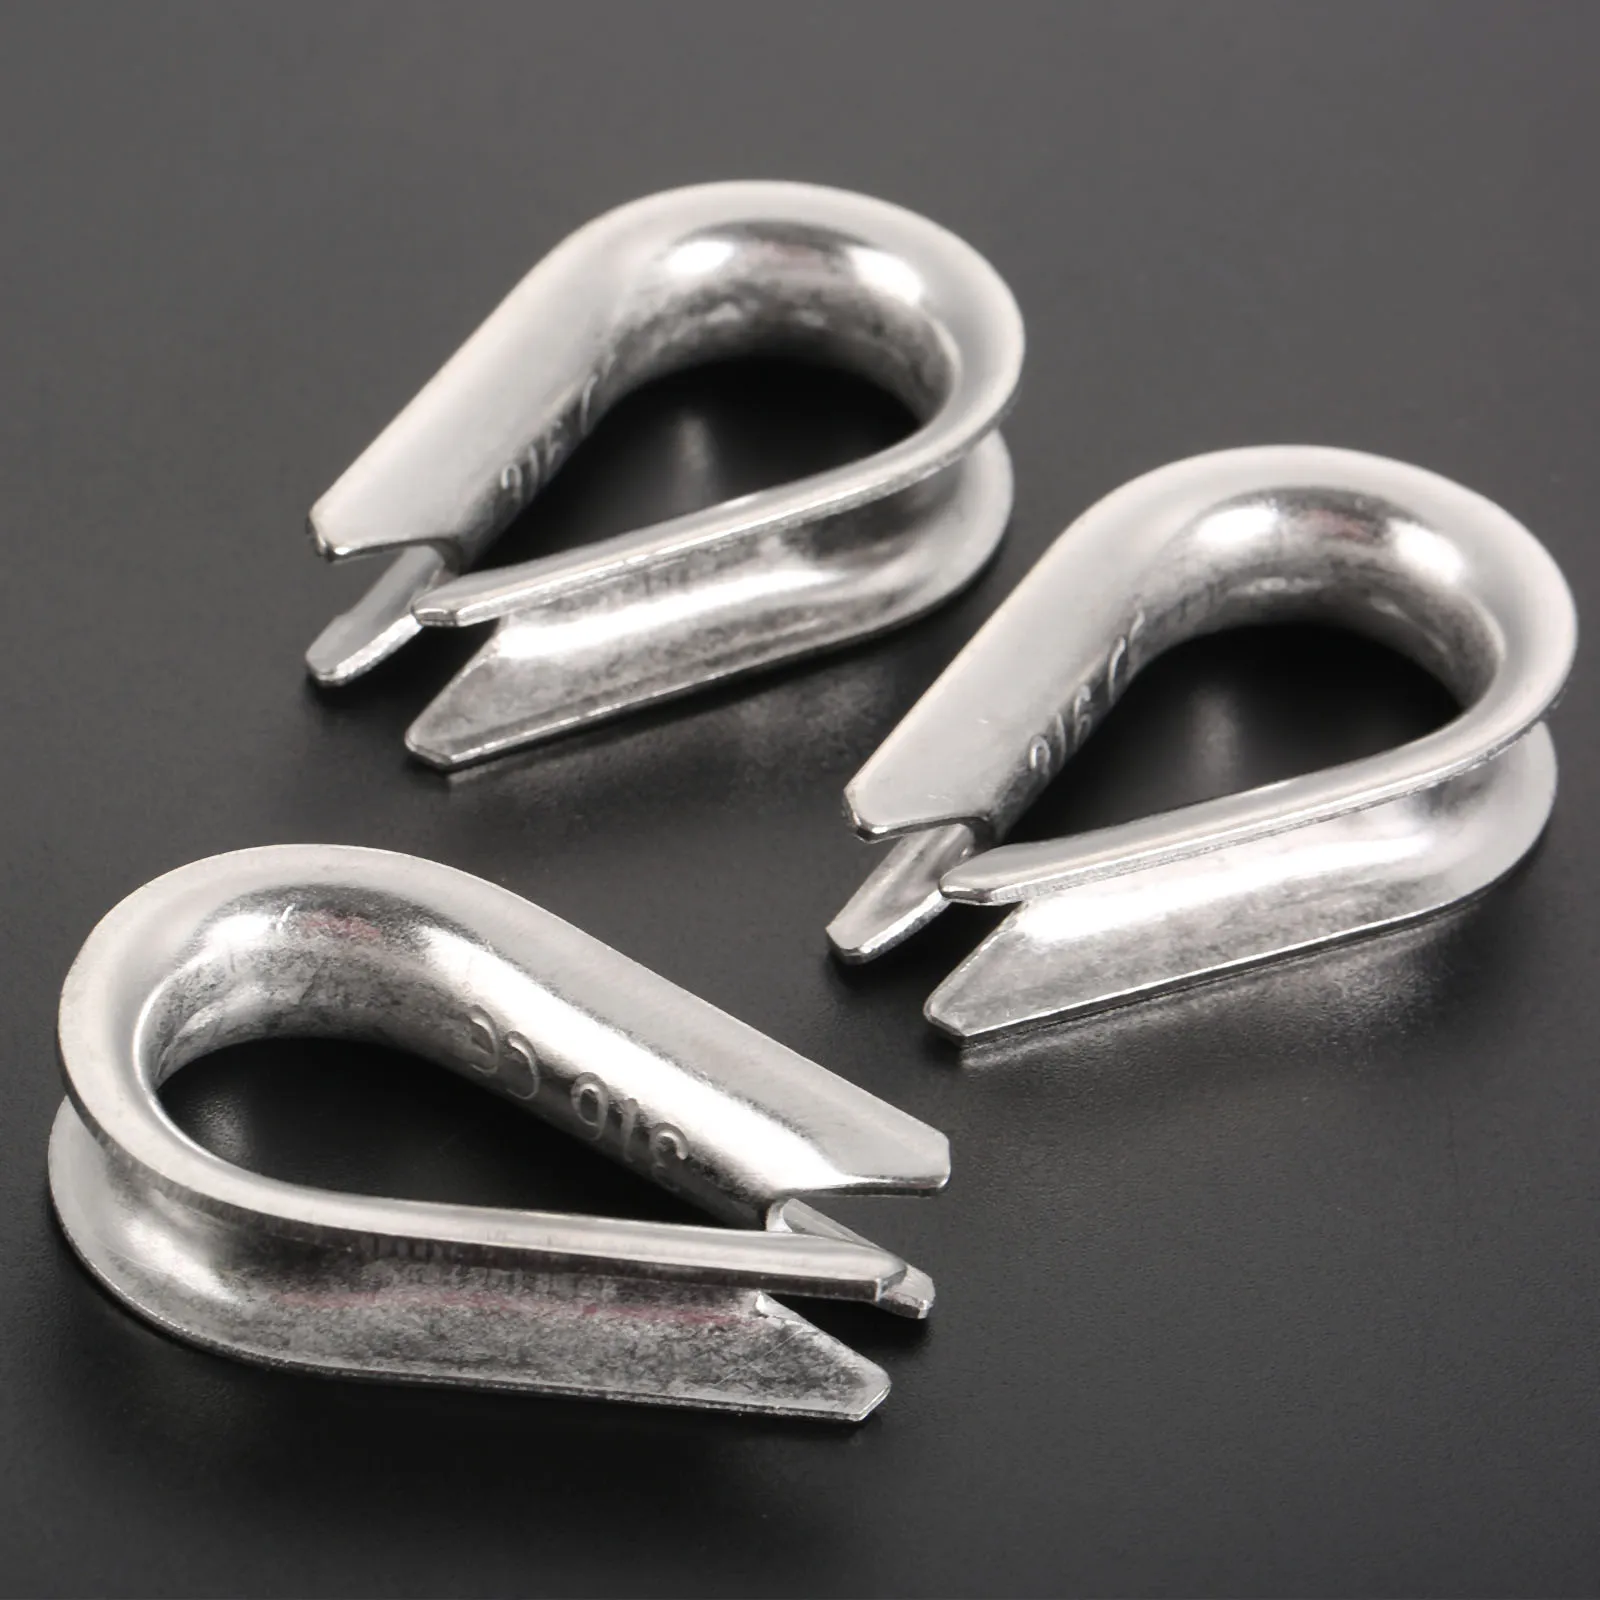 10Pcs Wire Rope Thimbles Marine Grade 316 Stainless Steel for 8mm / 5/16 Inch Diameter Wire Rope/Cable Boats Accessories 100m diameter 1mm 1 5mm 2mm steel flexible wire rope soft cable stainless steel clothesline